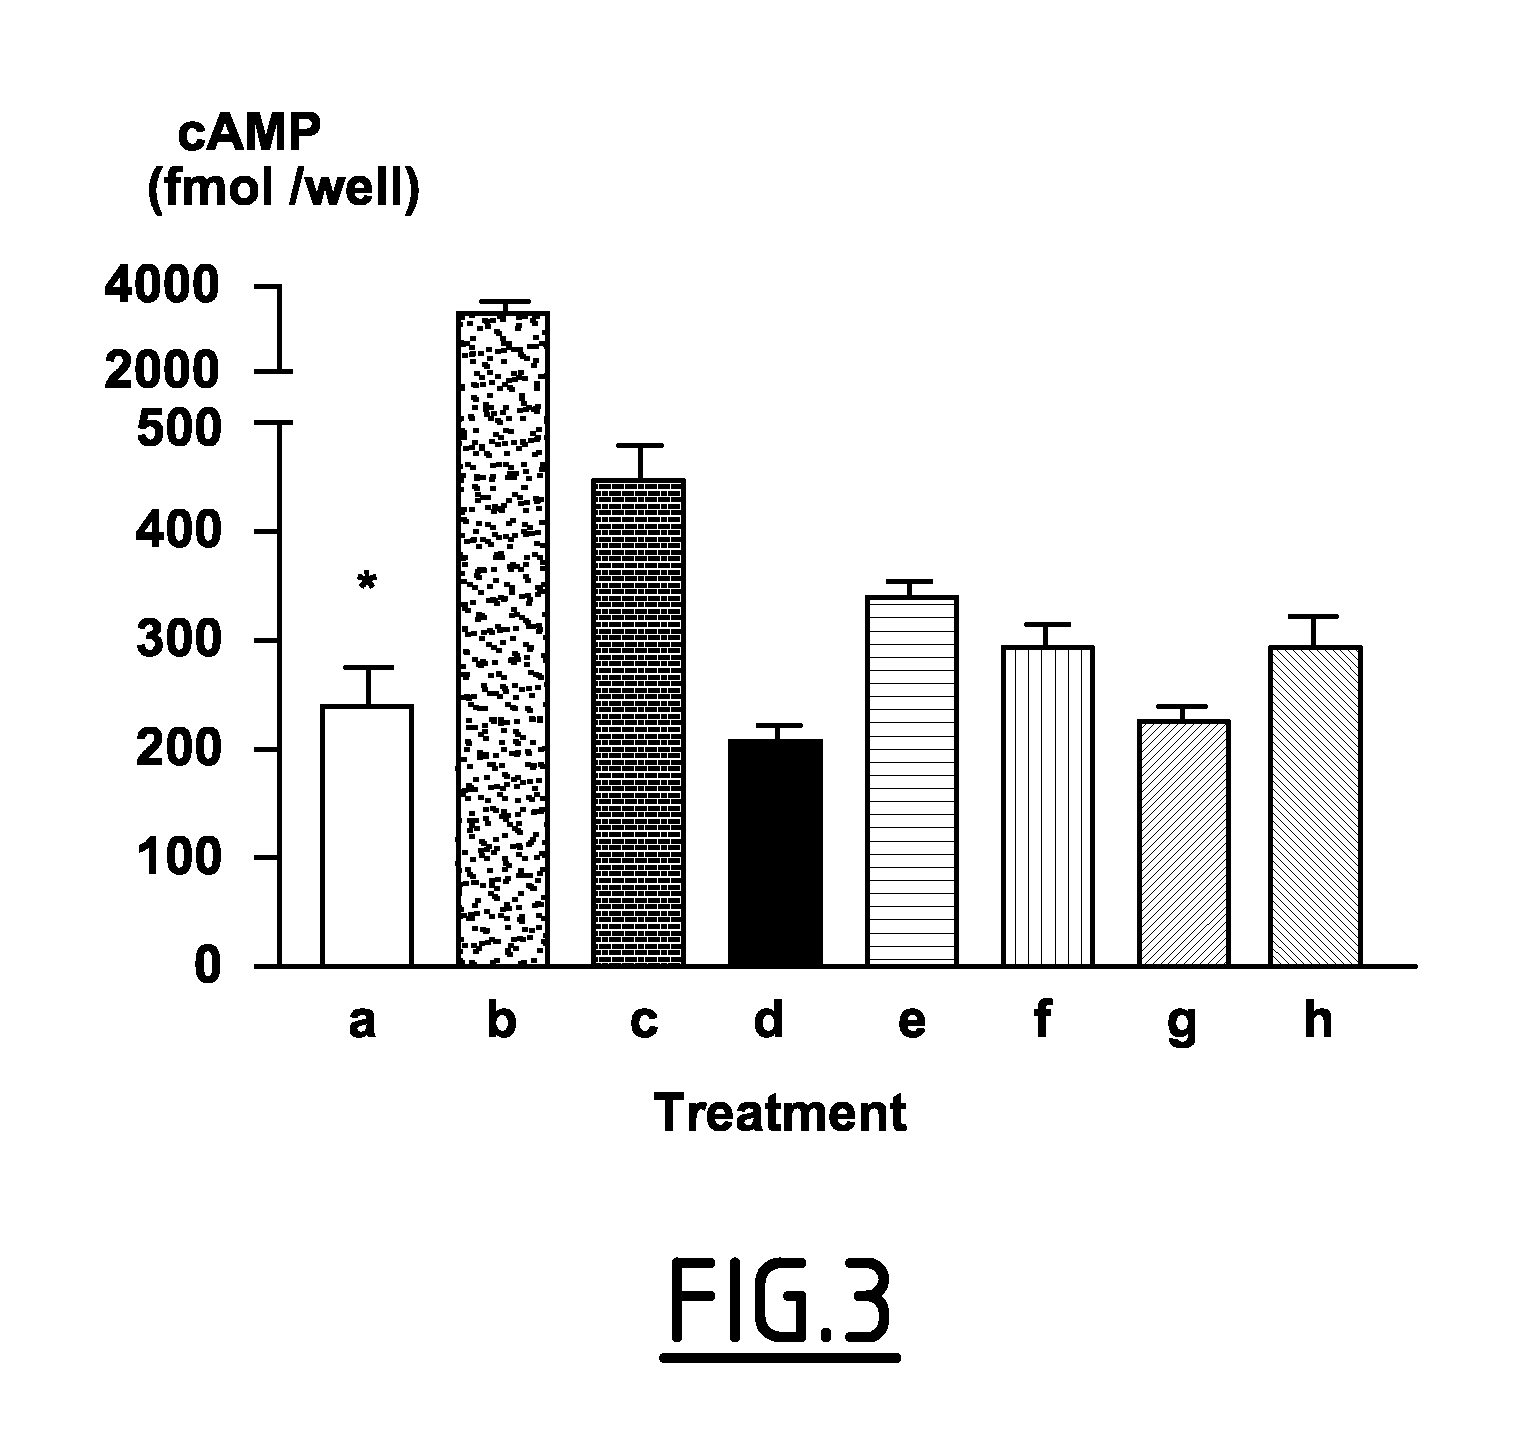 Compound comprising alpha-msh for use in endodontic regeneration